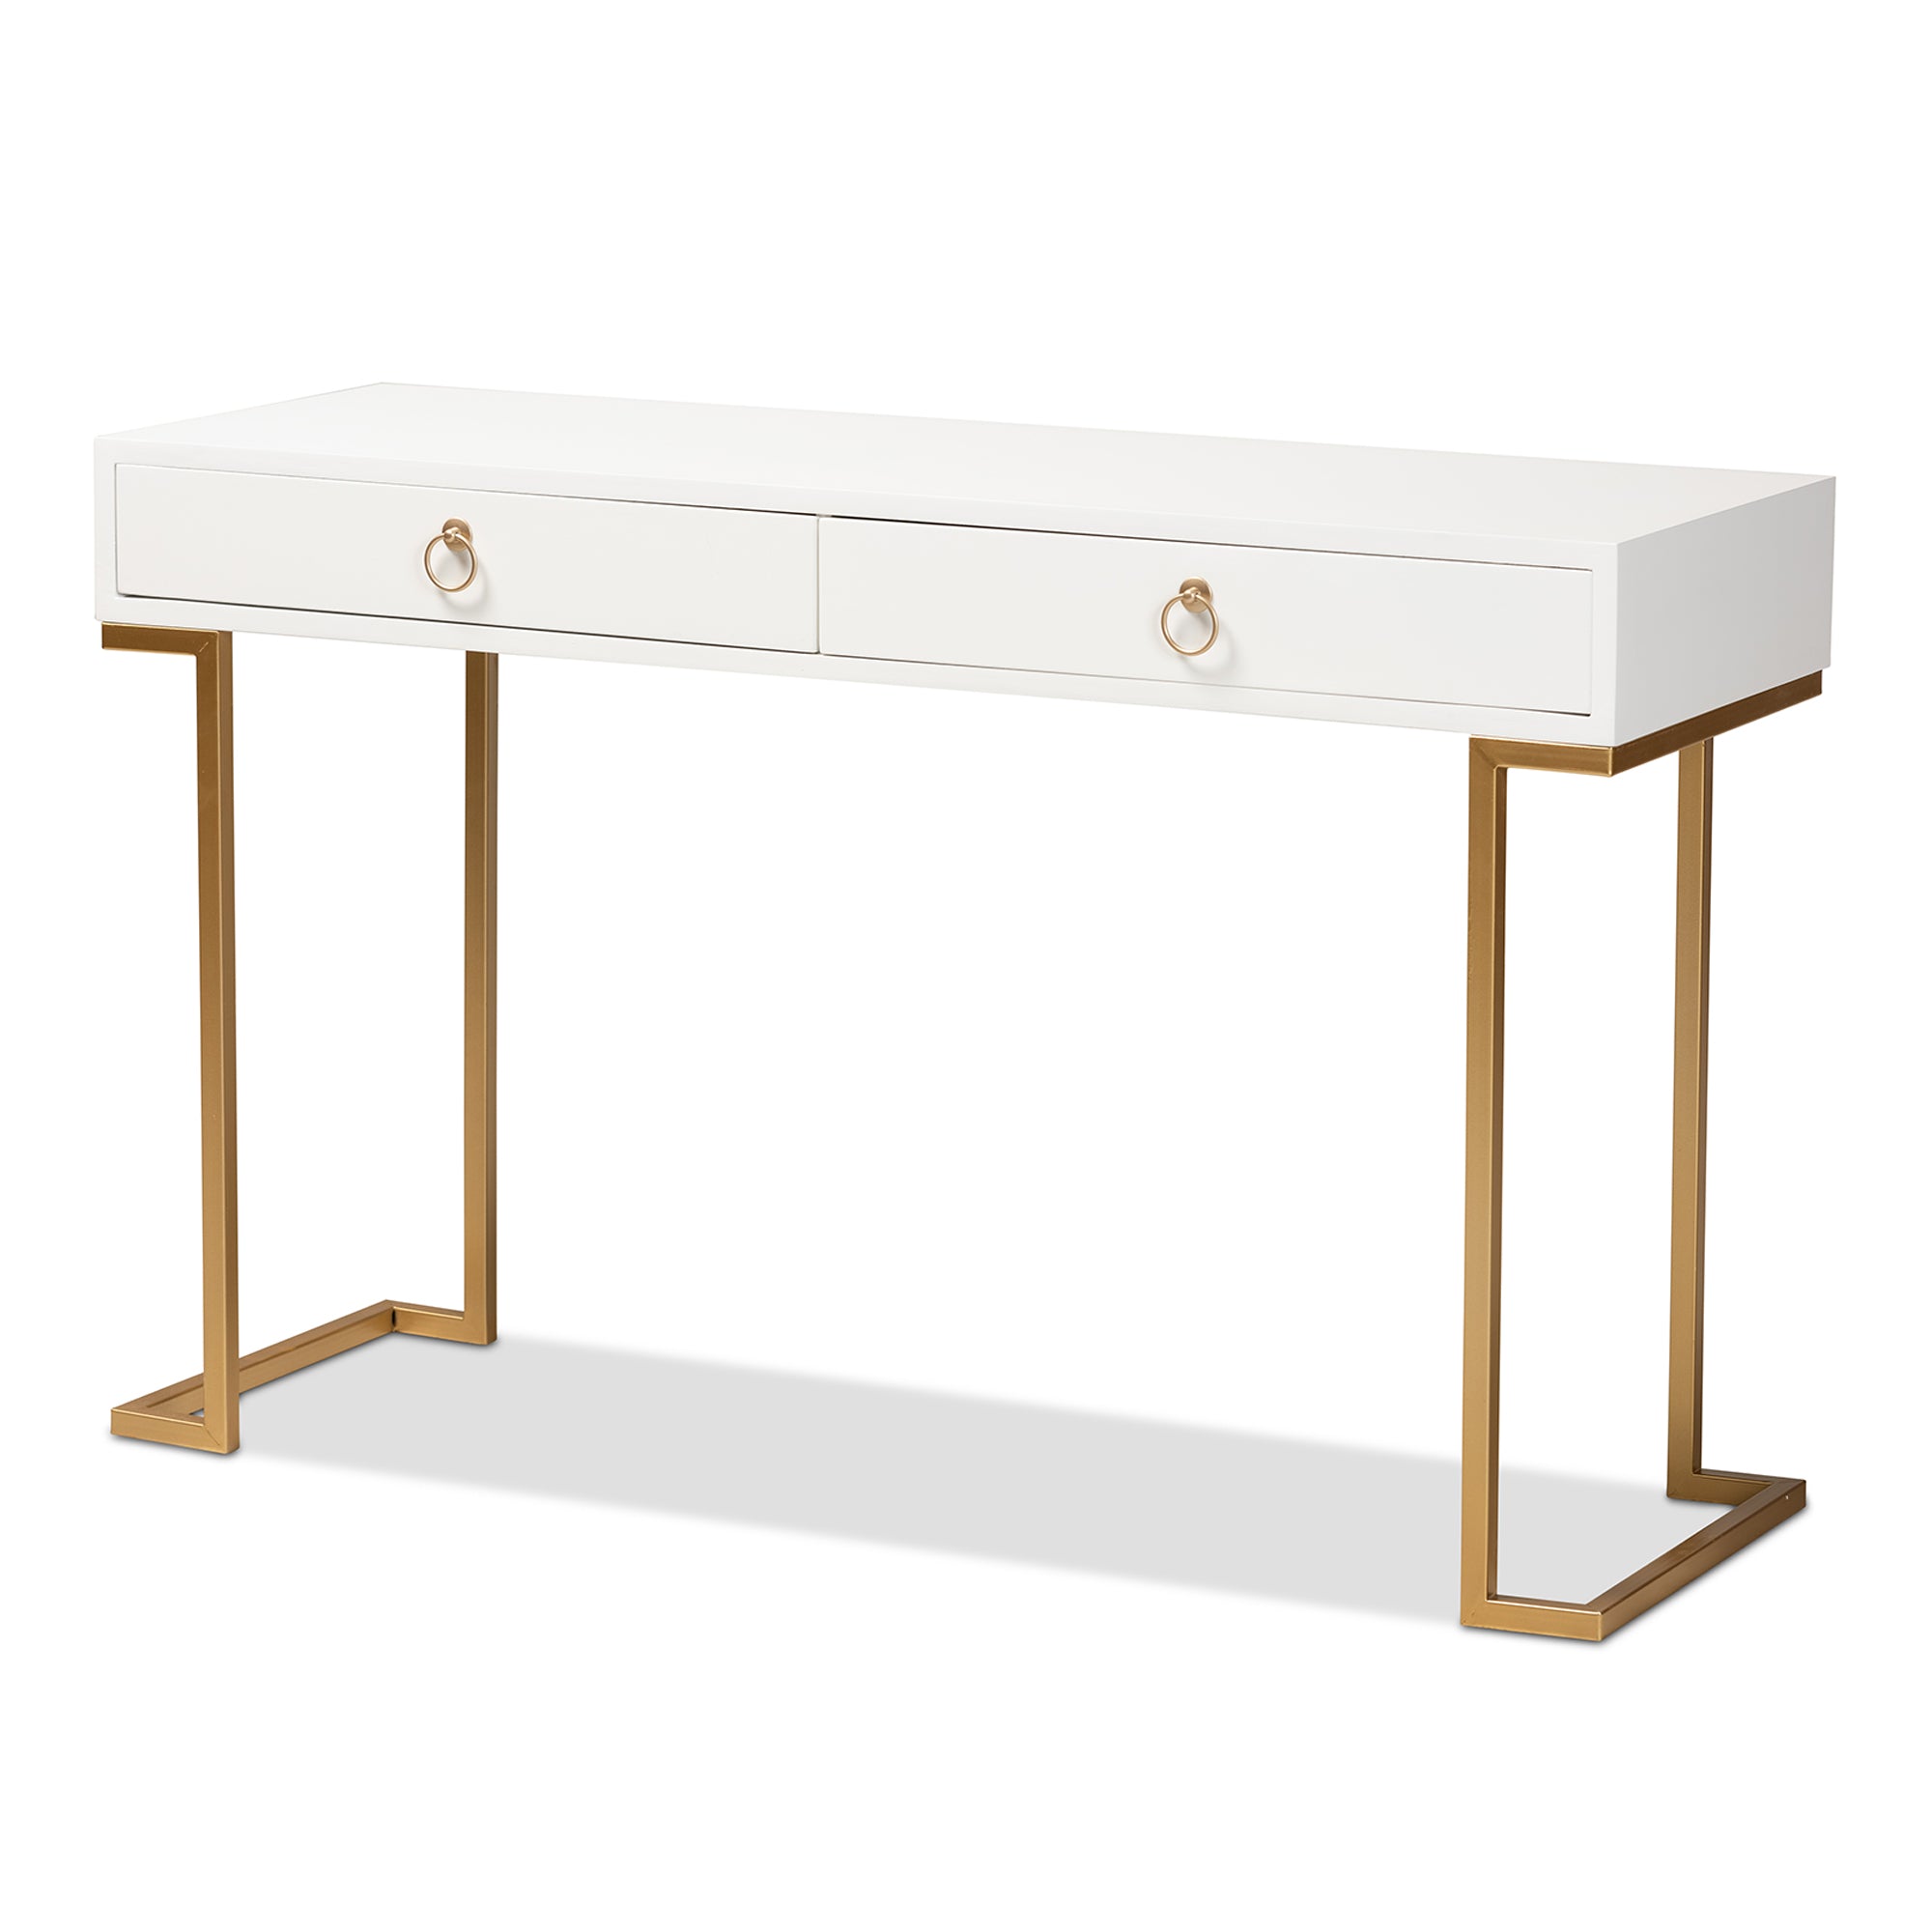 Beagan Contemporary Console Table 2-Drawer-Console Table-Baxton Studio - WI-Wall2Wall Furnishings